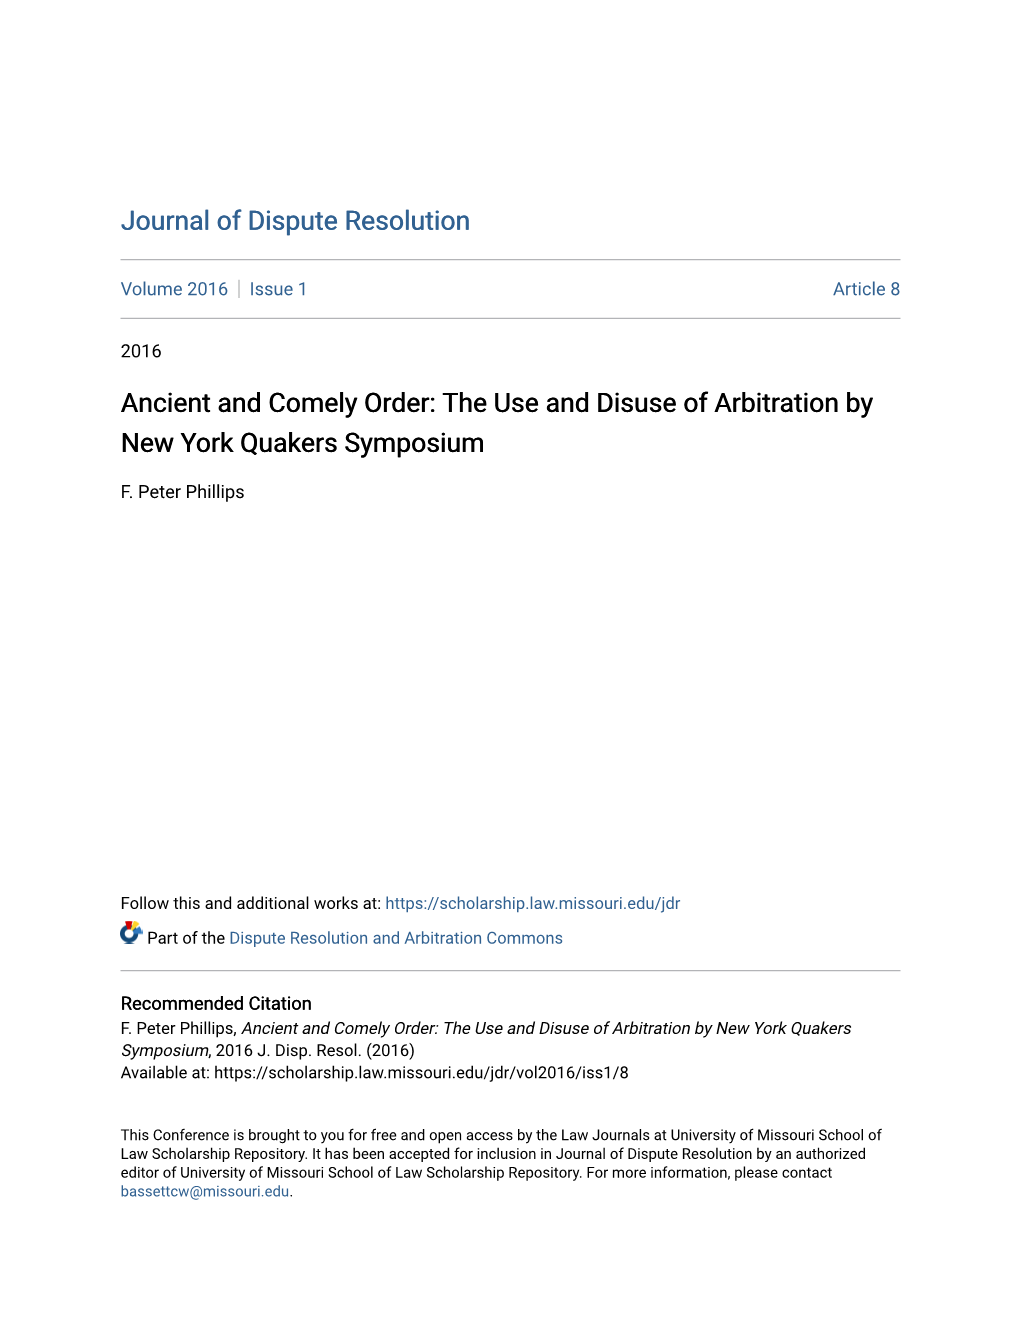 Ancient and Comely Order: the Use and Disuse of Arbitration by New York Quakers Symposium